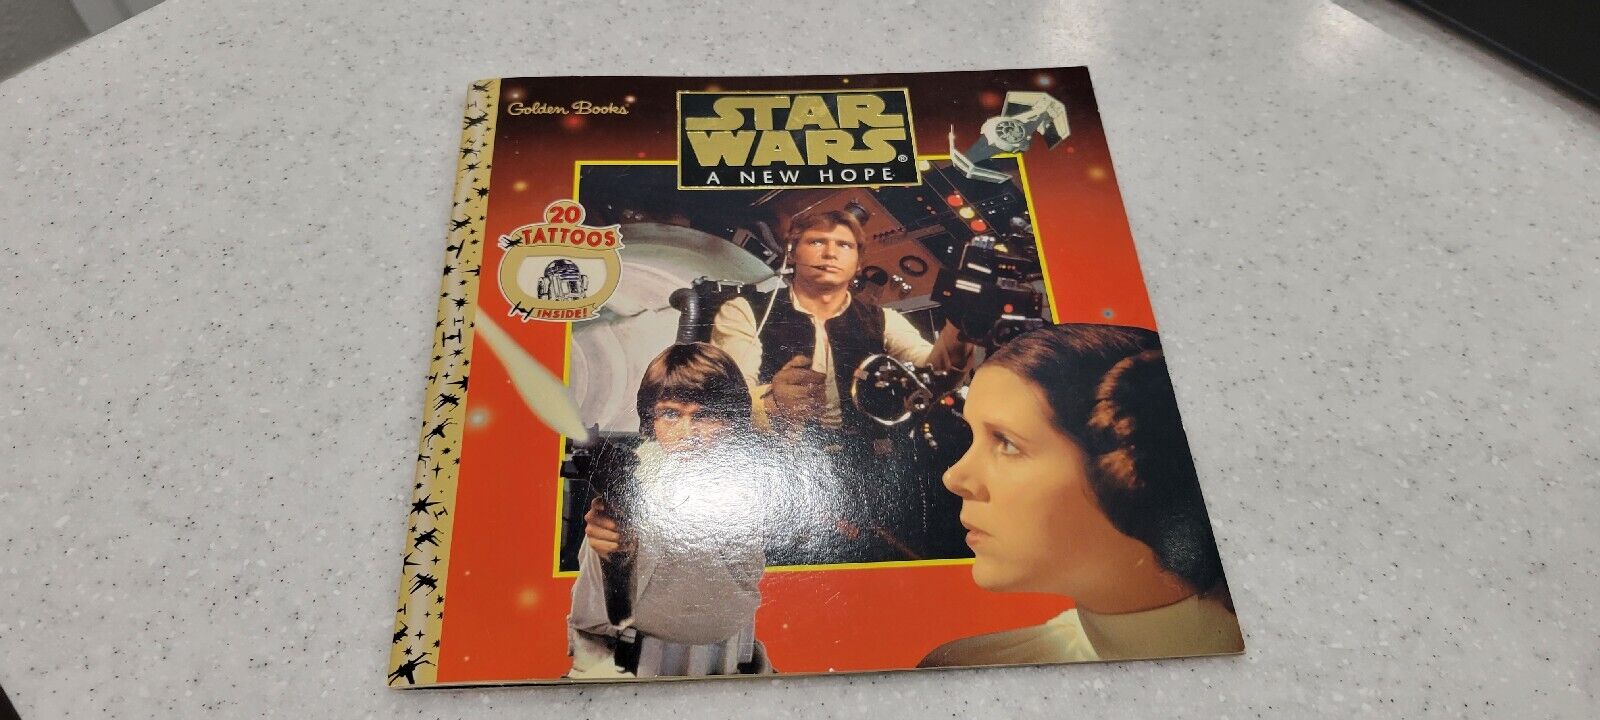 Vintage 1997 Golden Books STAR WARS A New Hope 20Tattoos 1st In Series Of 3 RARE